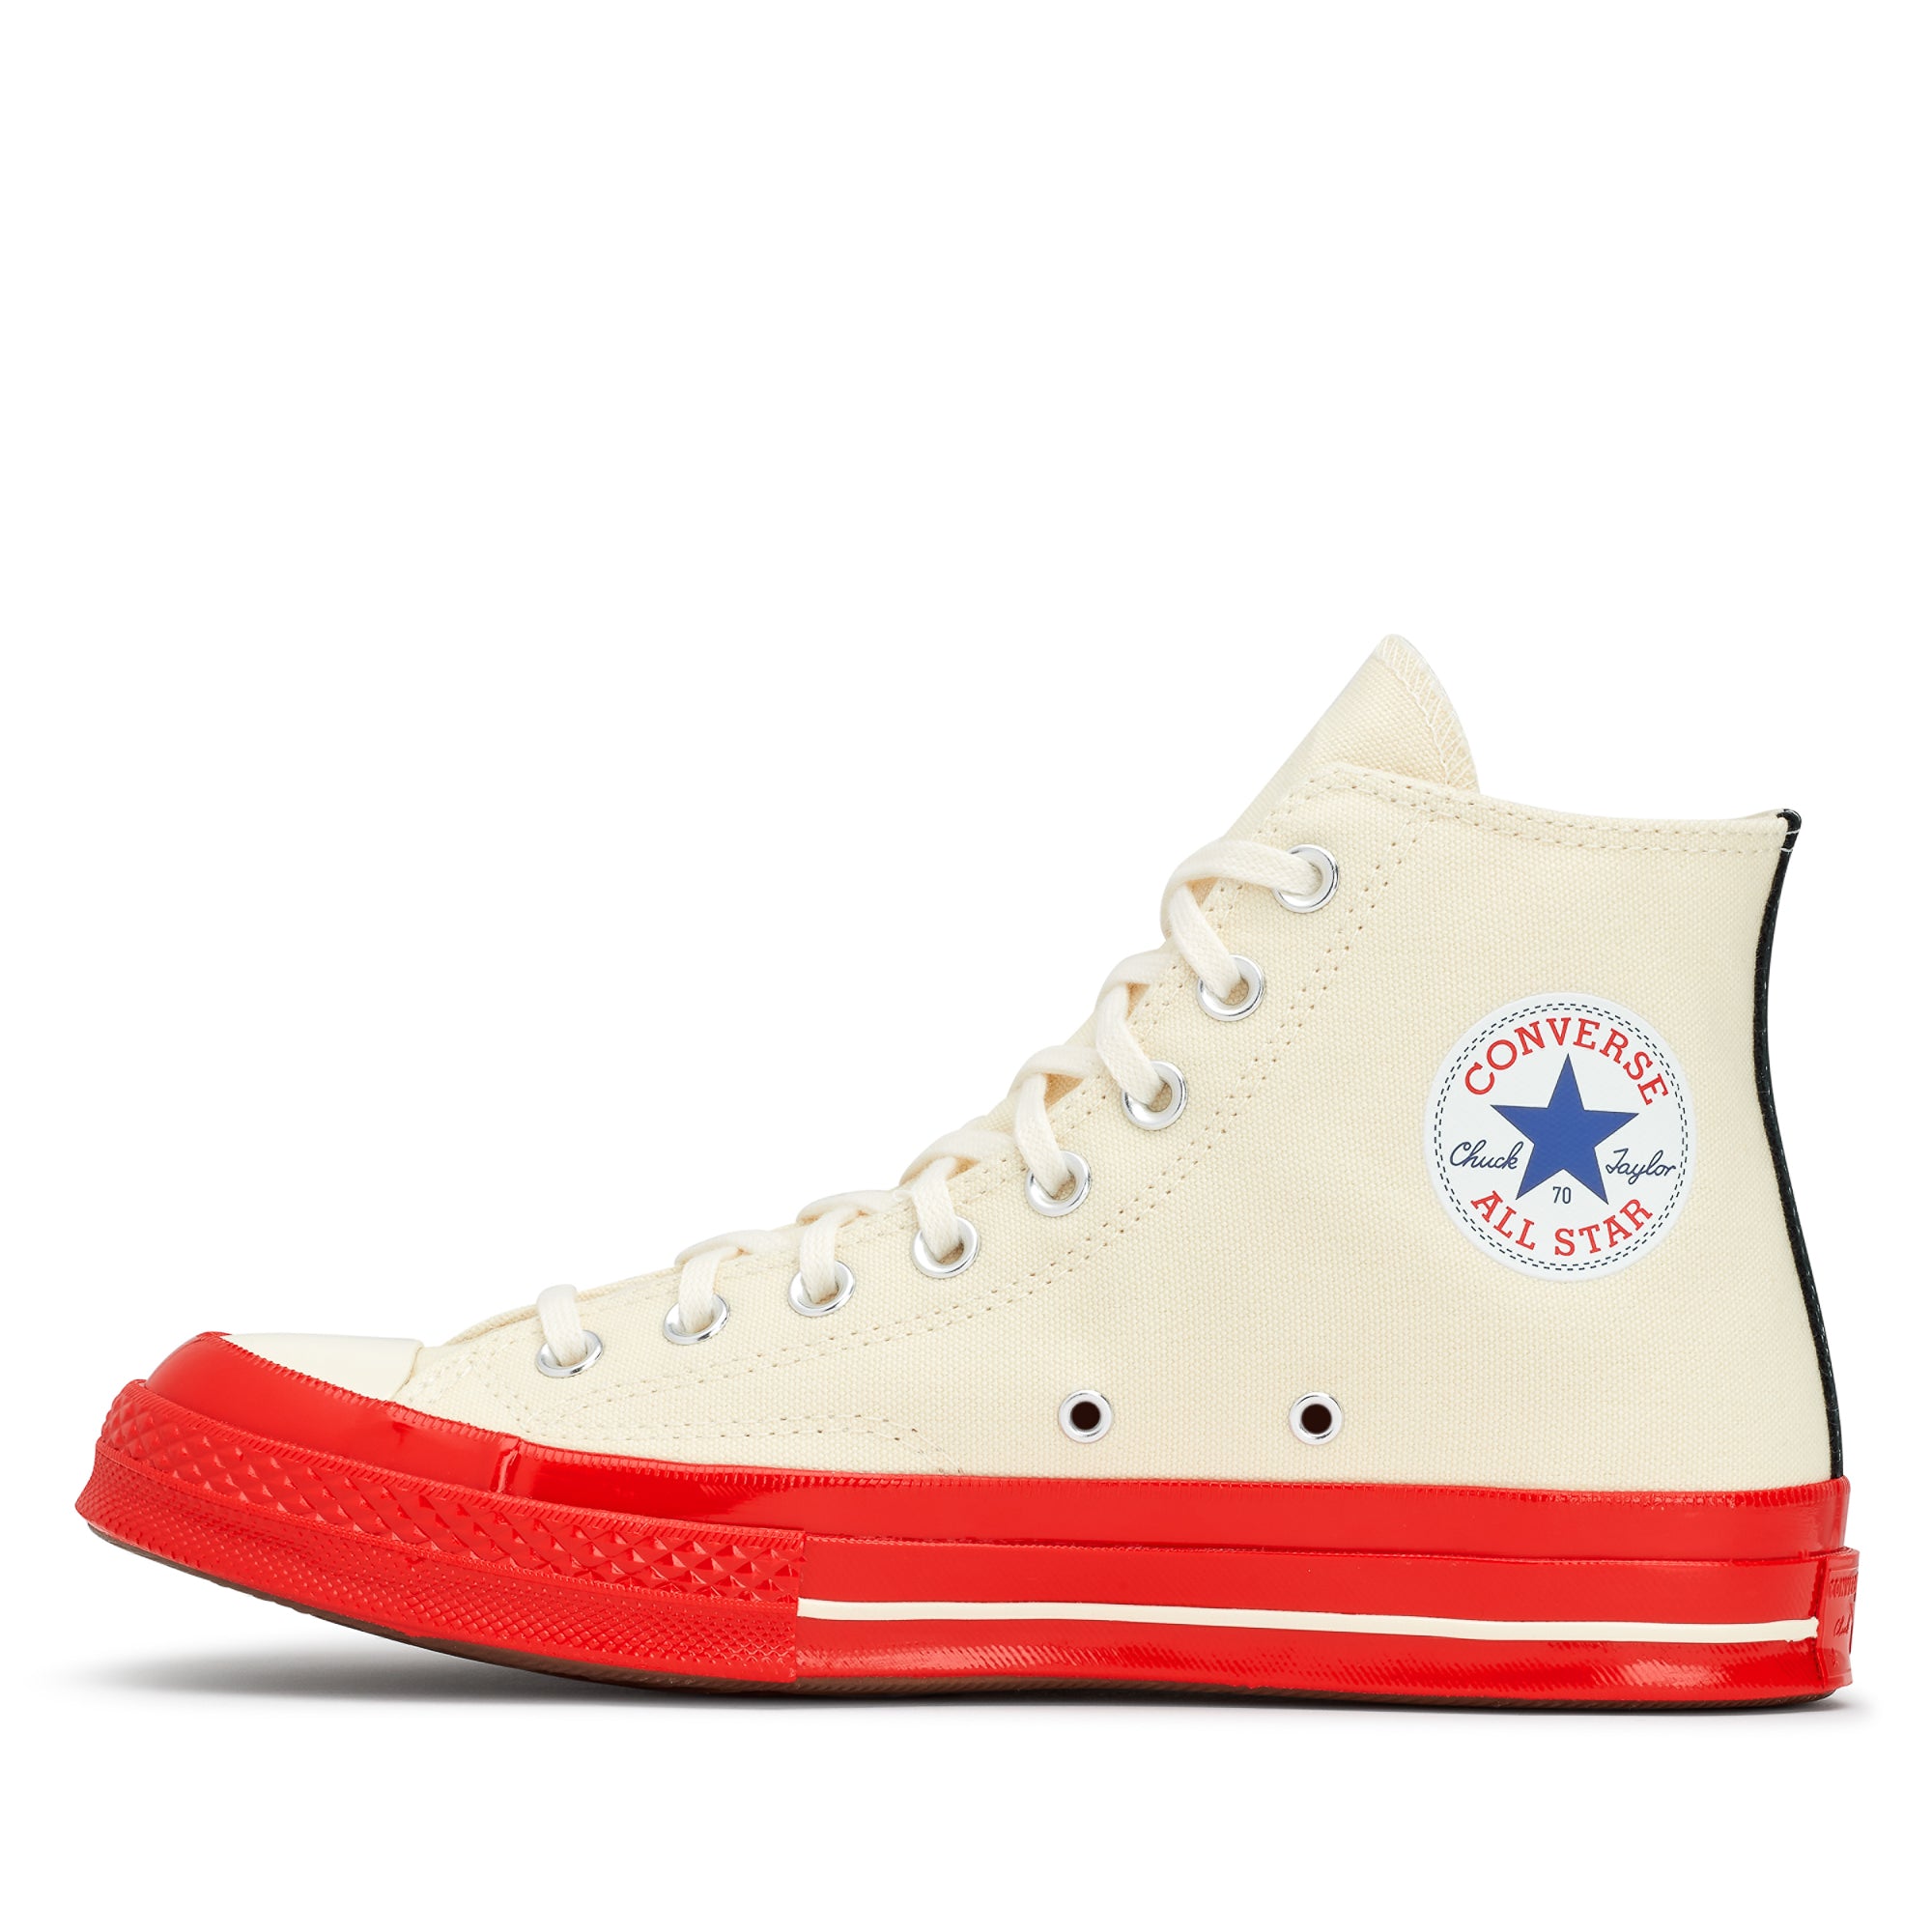 PLAY CONVERSE - Chuck 70 High Top - (Red/White) view 2